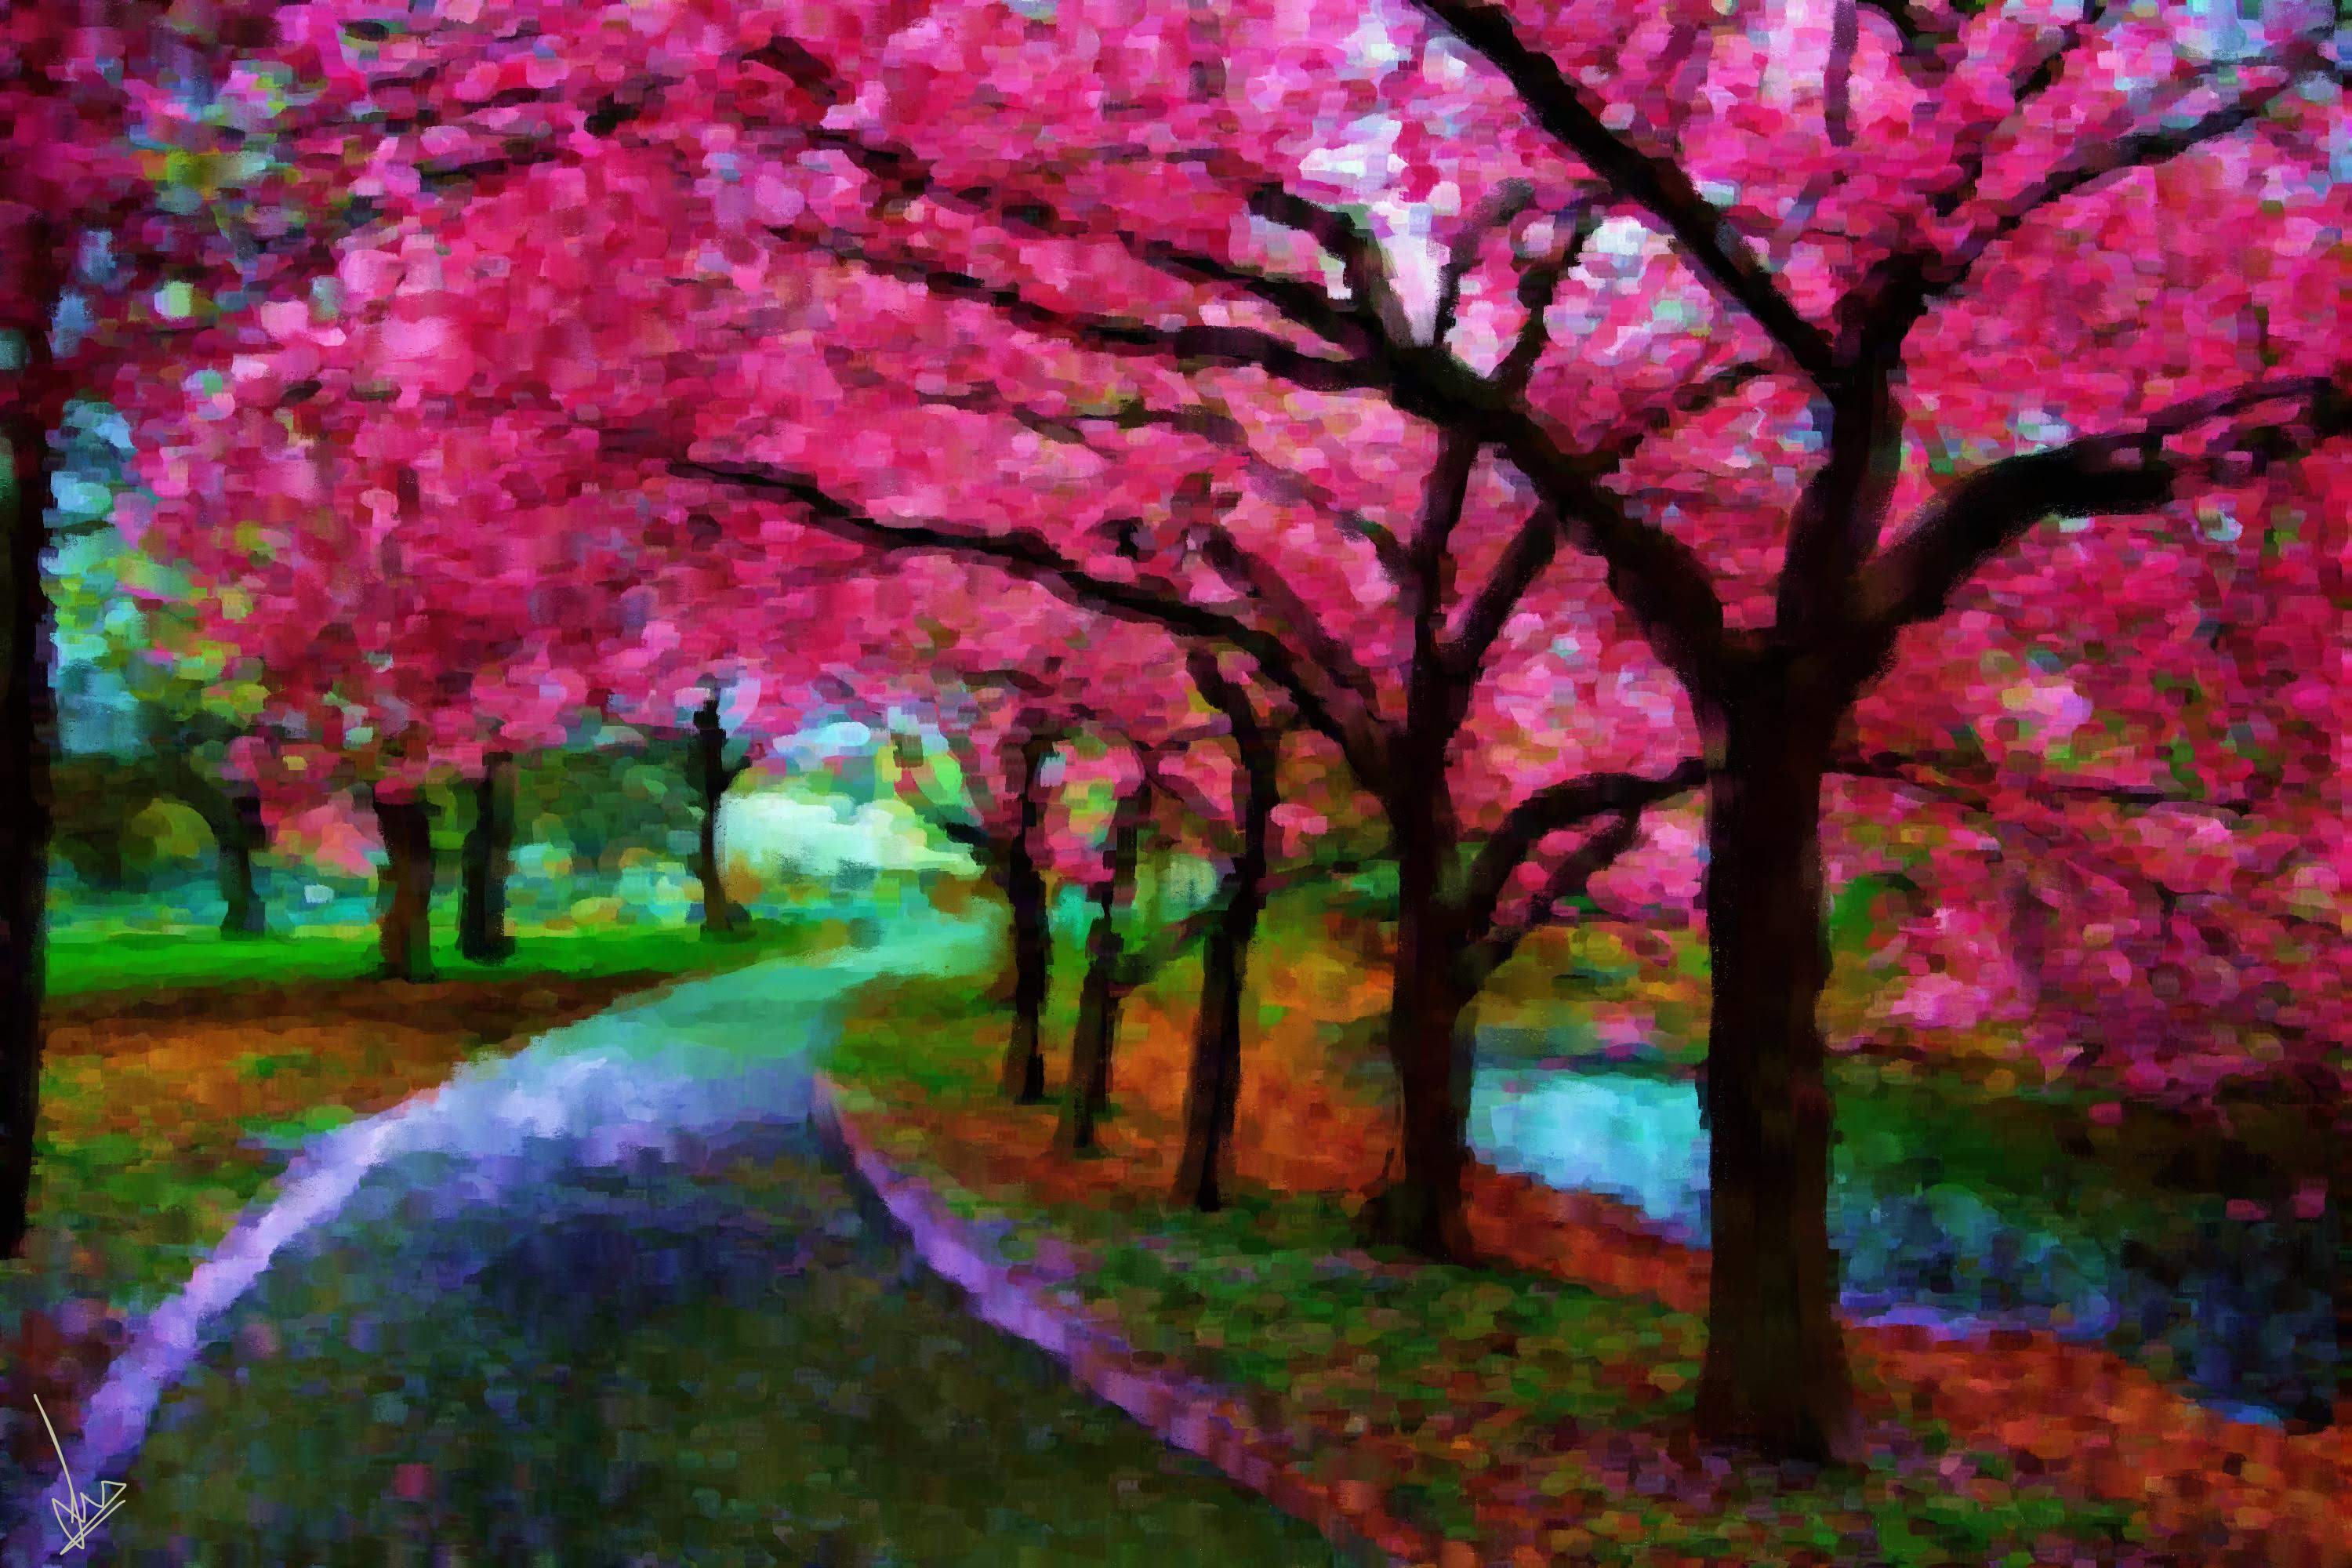 Cherry Blossoms of Japan - a digitial painting capturing this rare beauty